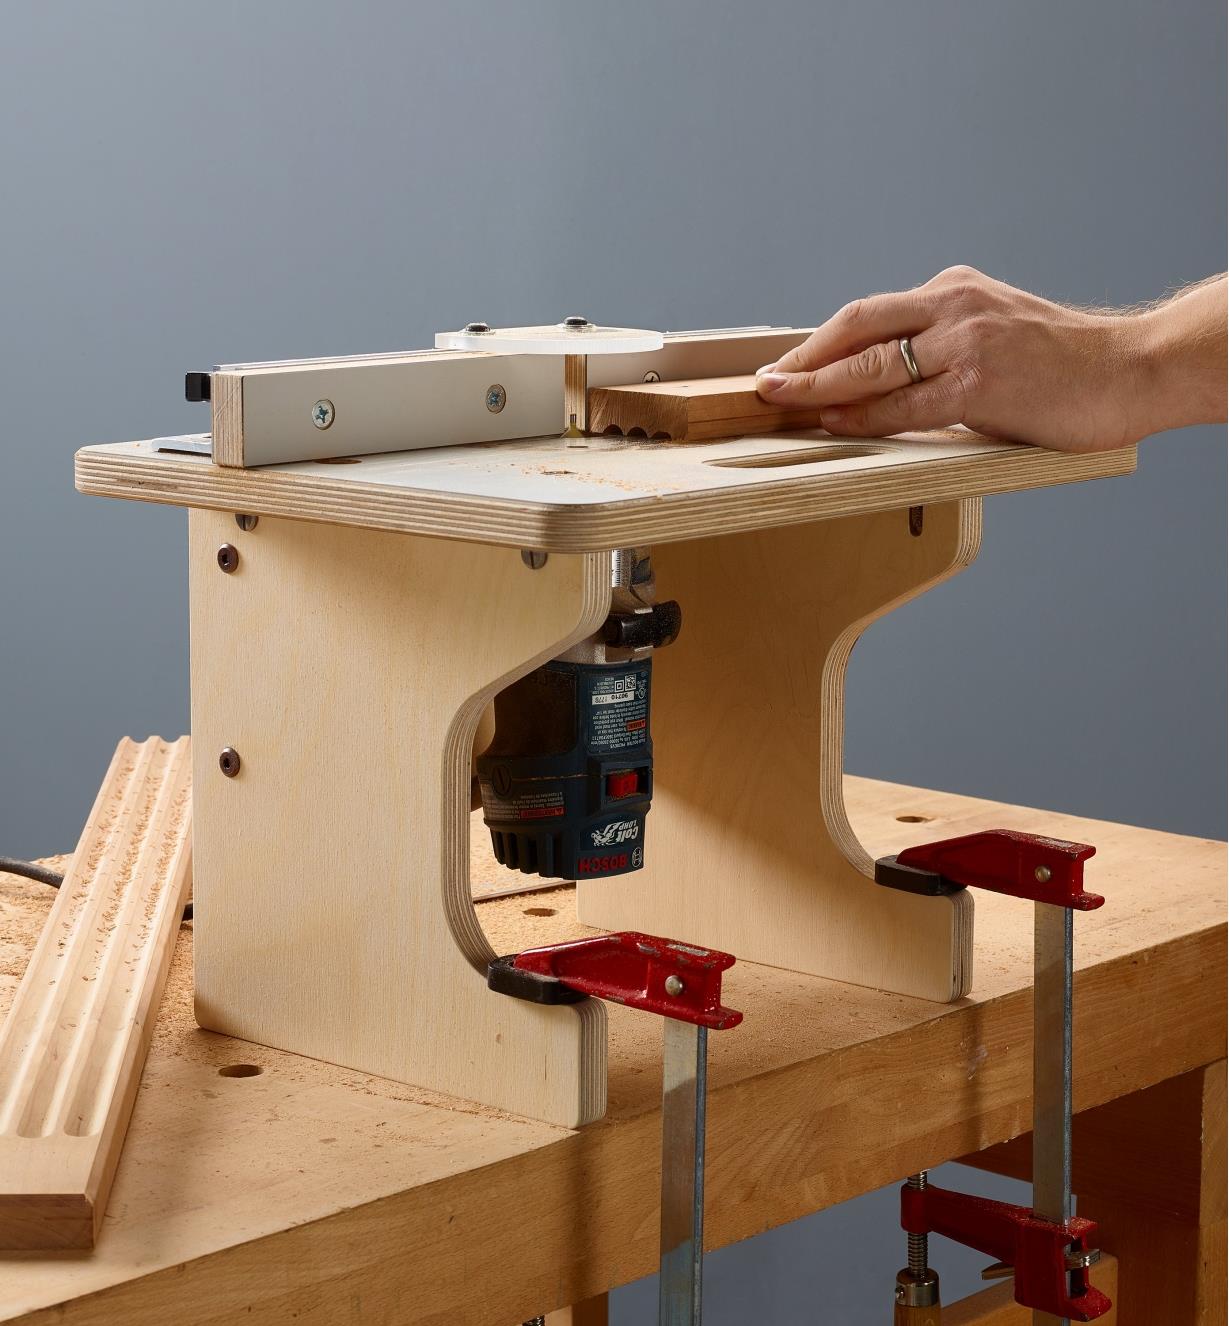 Veritas table system for compact routers clamped to a workbench